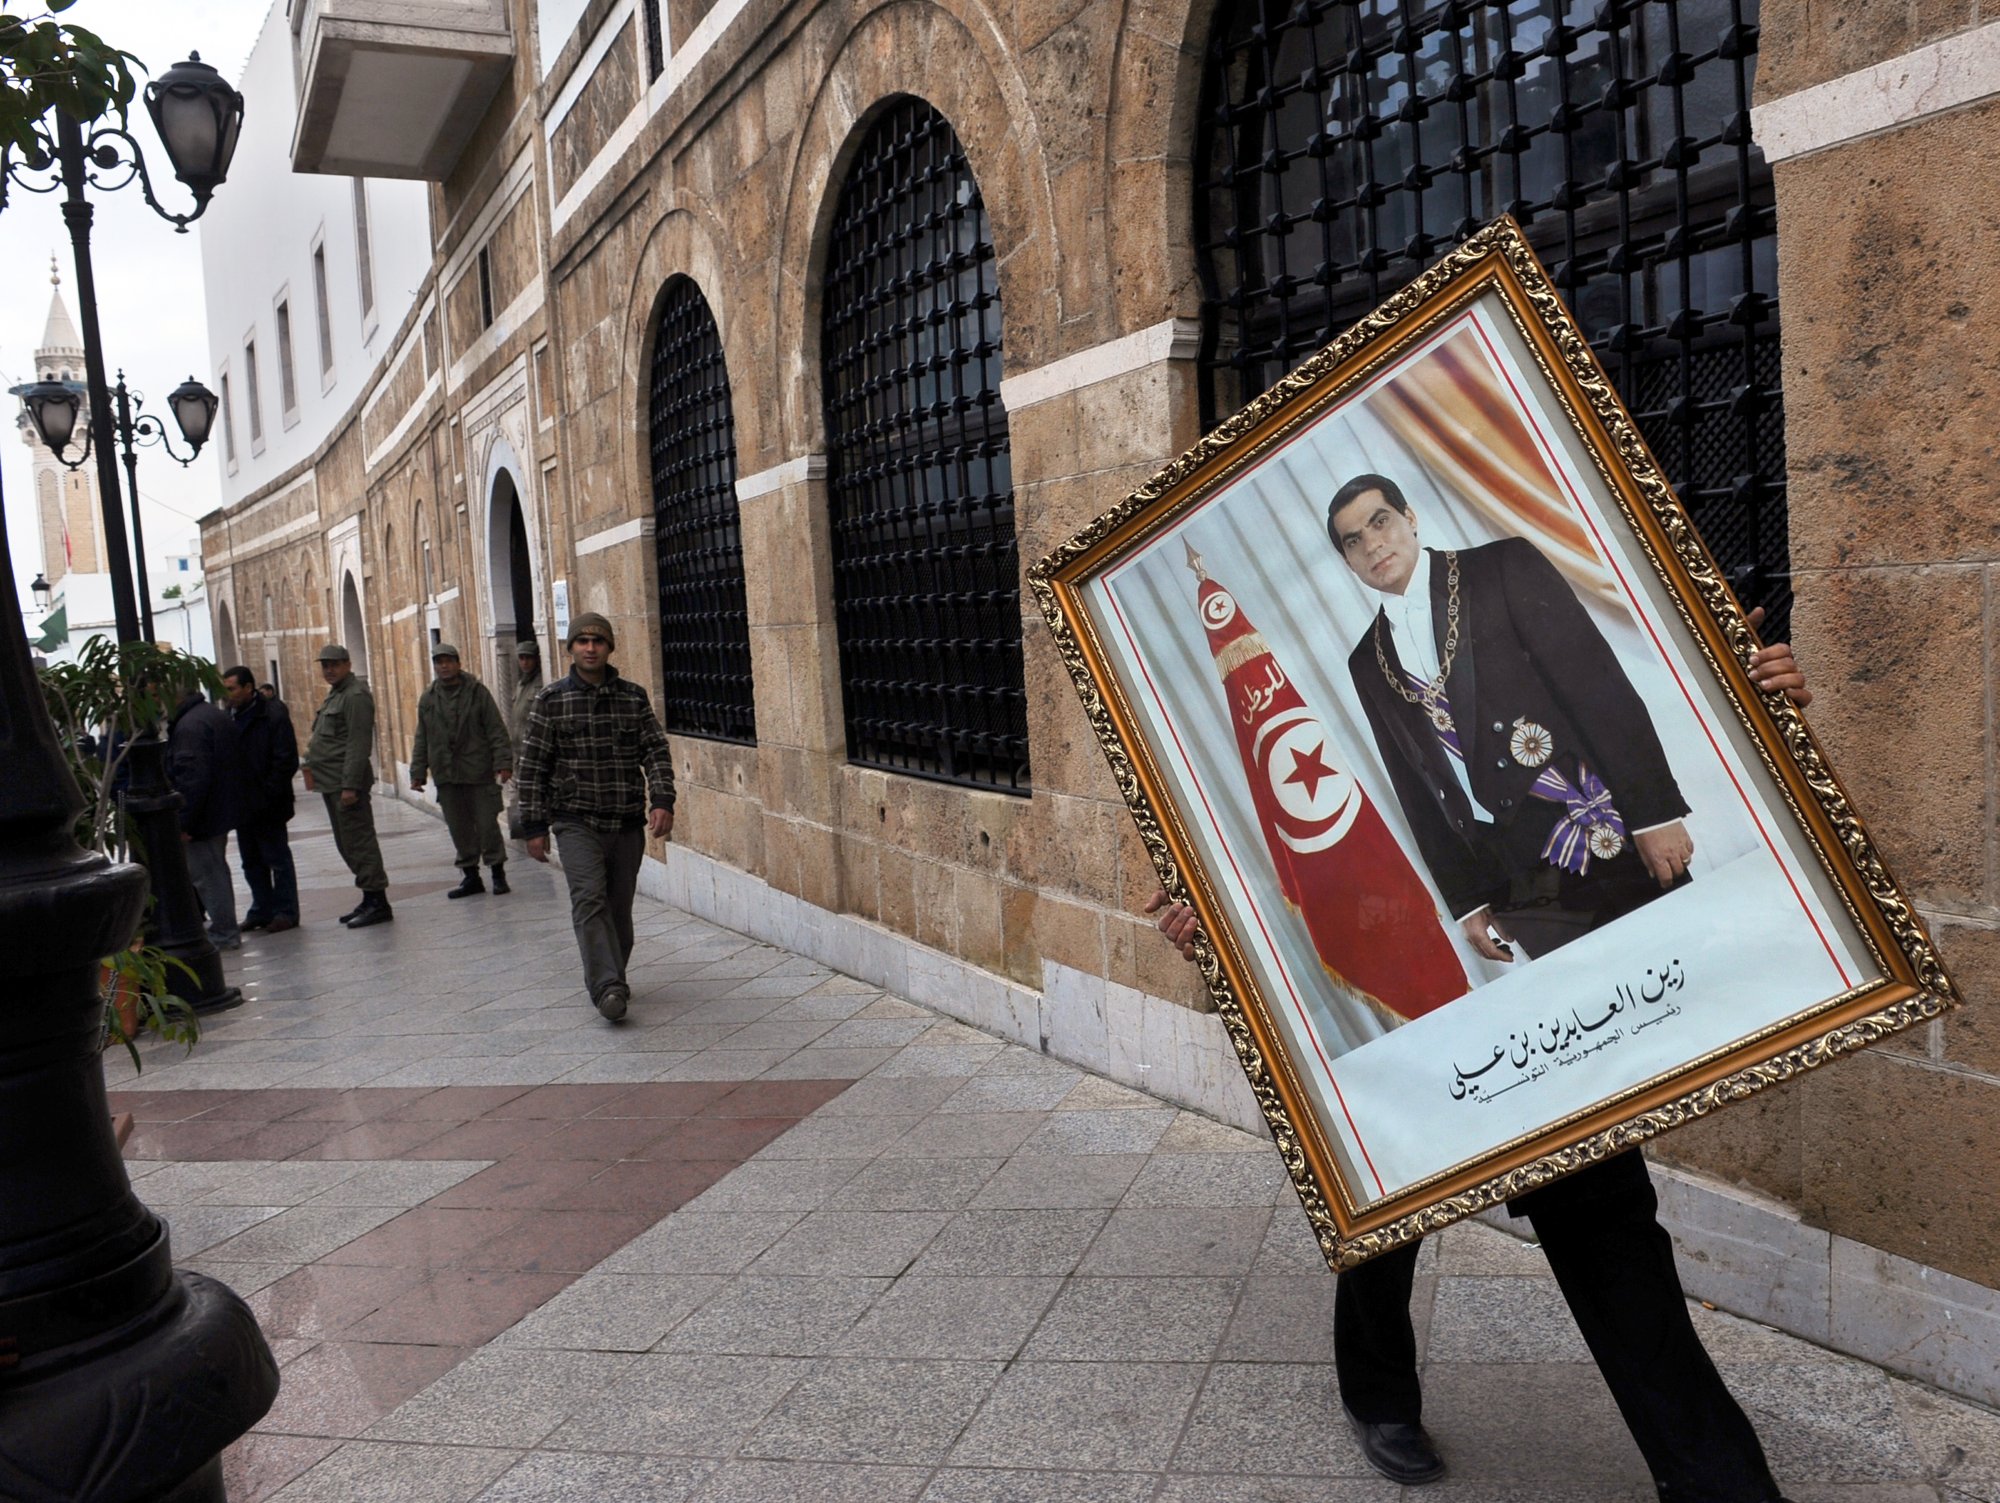 A Tunisian employee of the prime ministry removes a portrait of former Tunisian President Zine El Abidine Ben Ali on 17 January 2011 (AFP)